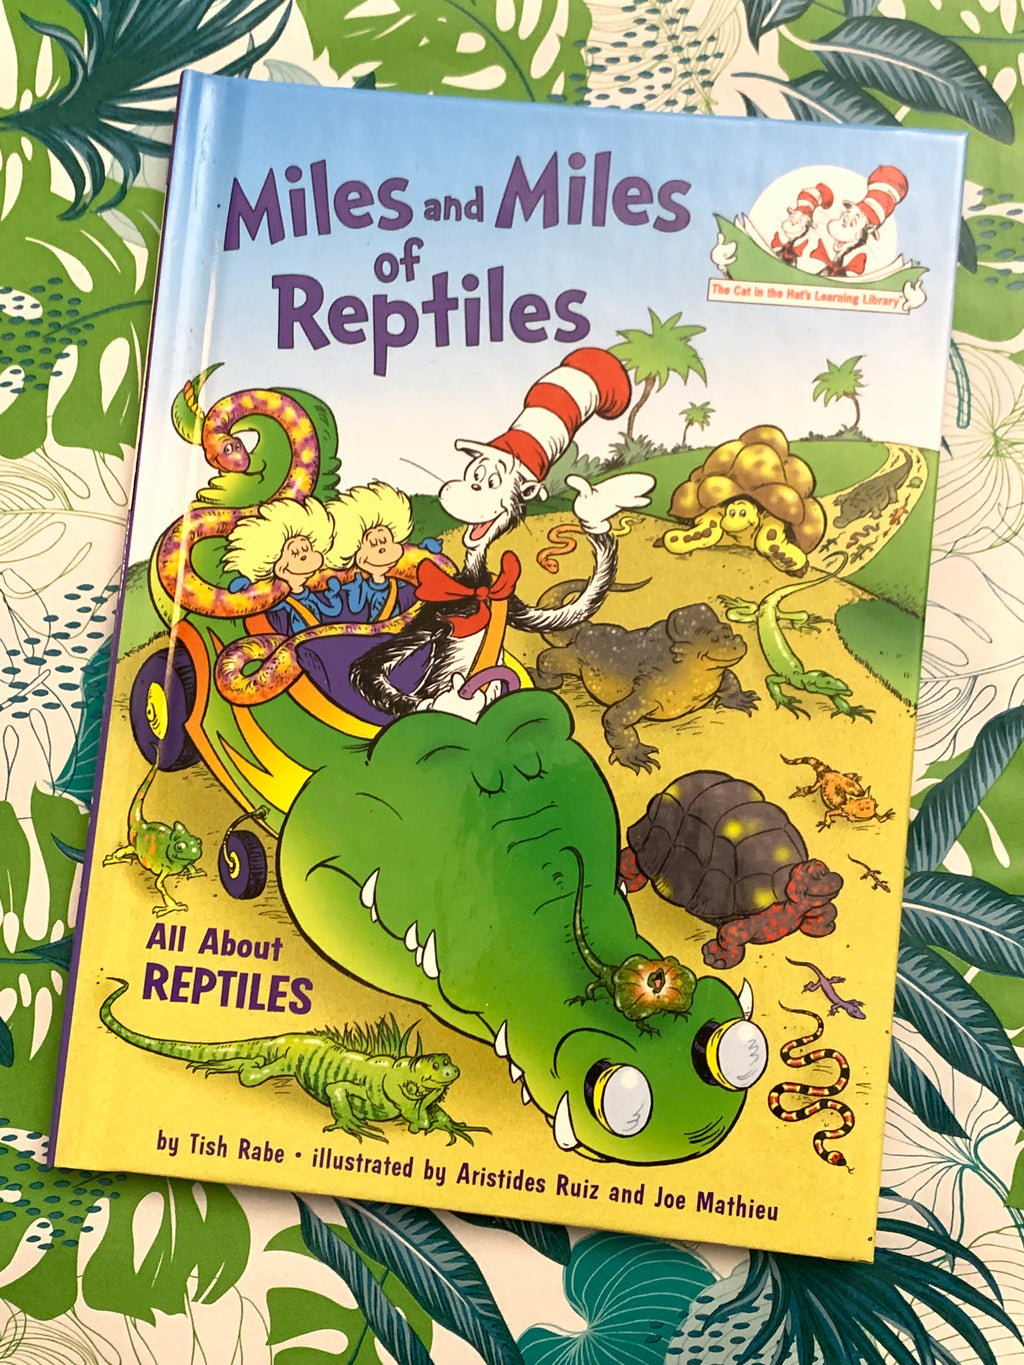 Miles and Miles of Reptiles: All About Reptiles- By Tish Rabe